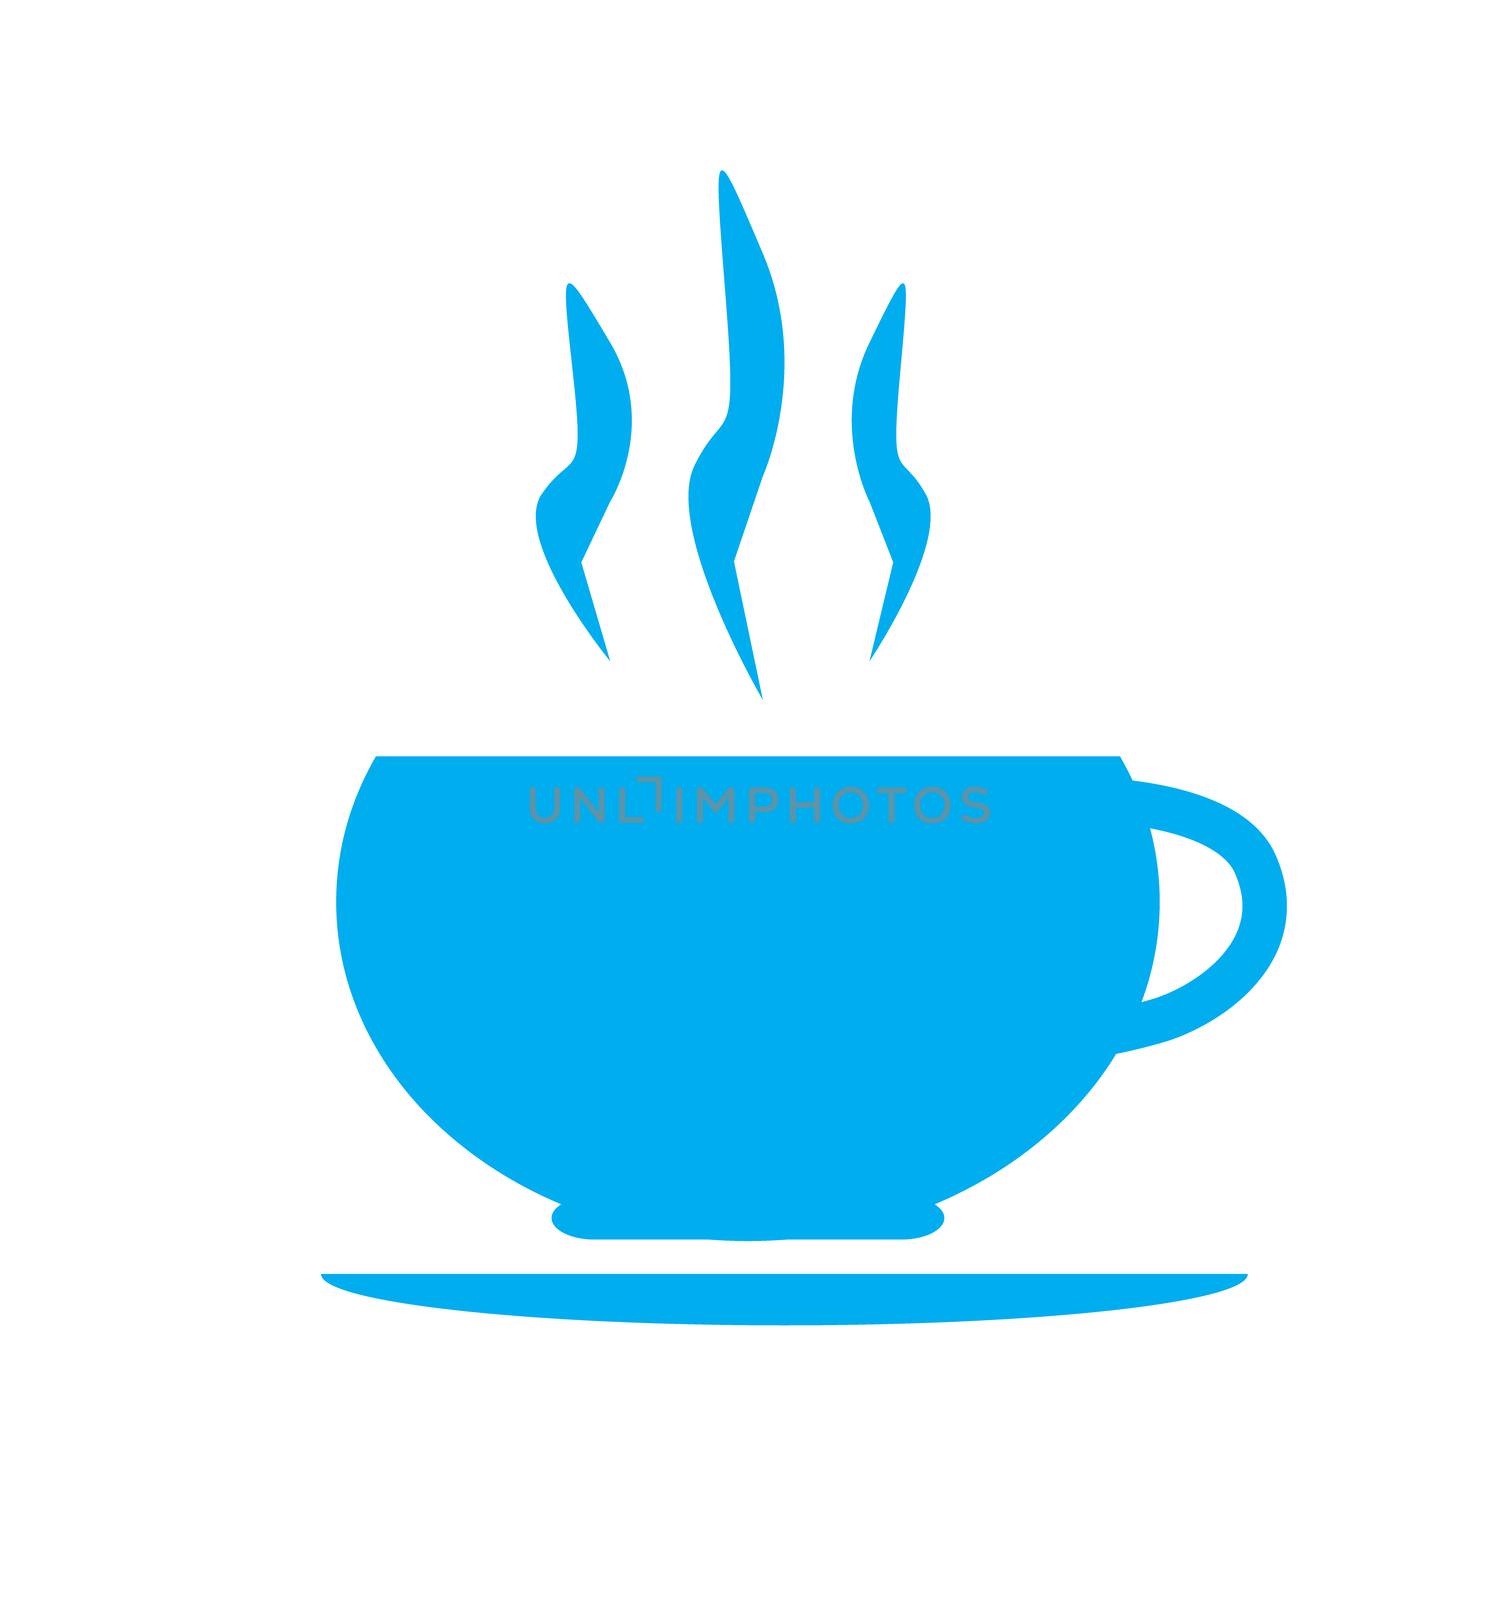 blue coffee cup icon on white background. flat style. coffee cup icon for your web site design, logo, app, UI. cup of hot drink symbol. cup of coffee and tea sign.  